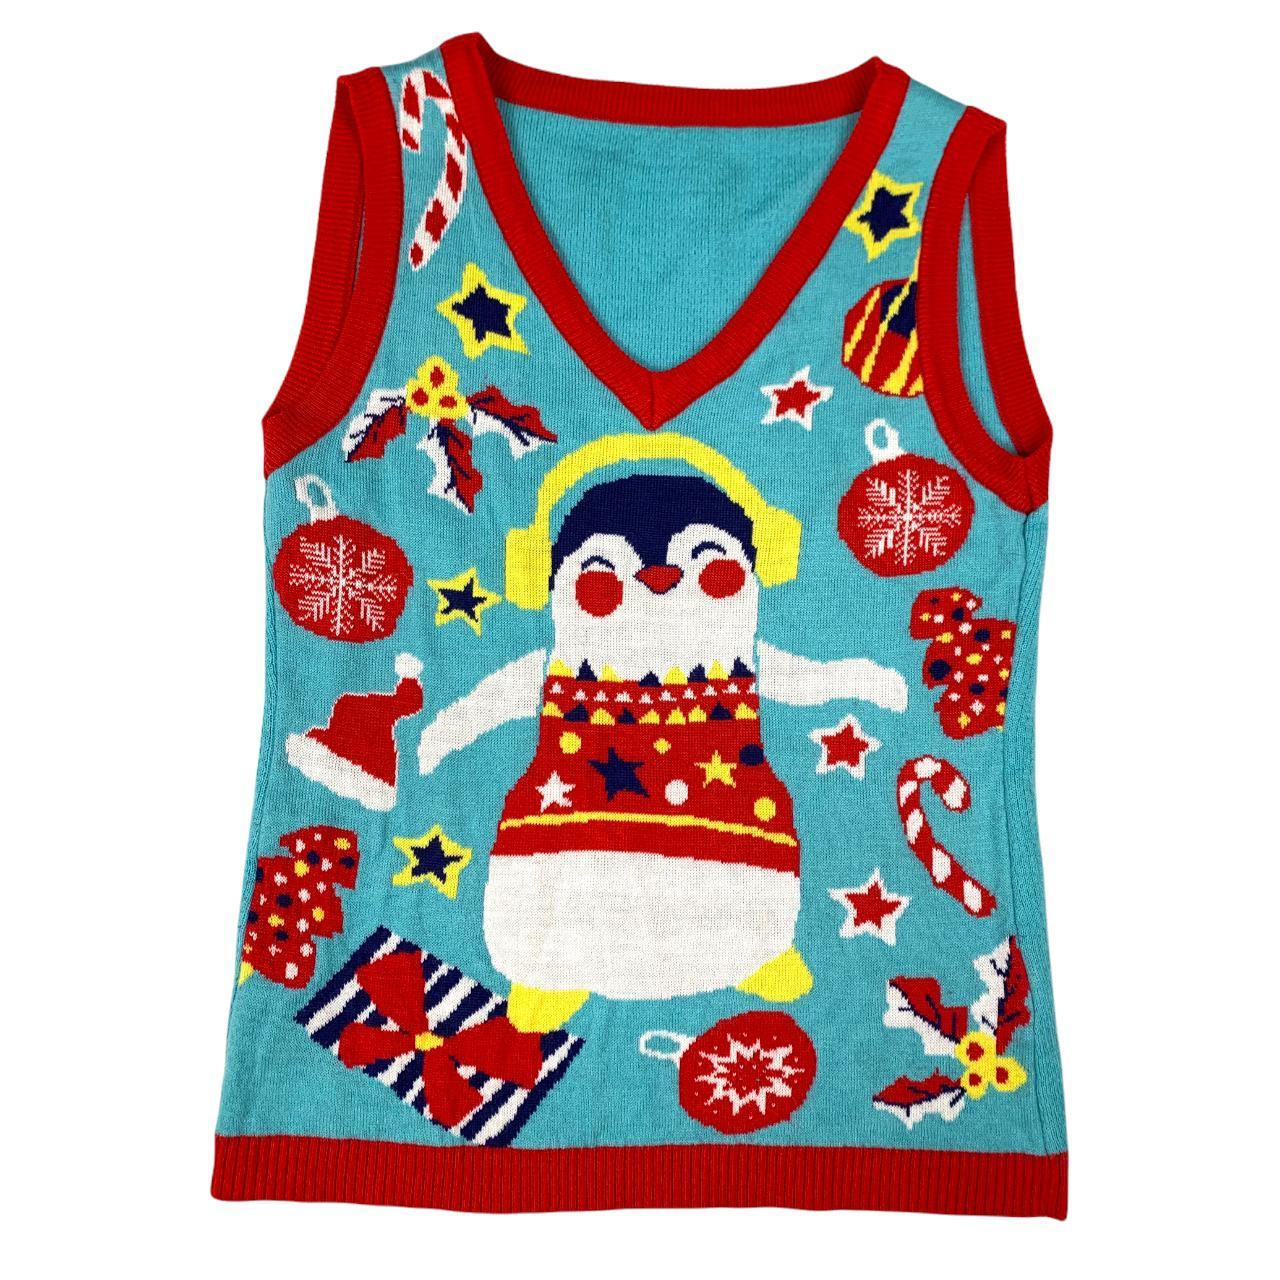 Product Image 1 - PENGUIN SWEATER VEST

This Christmas penguin